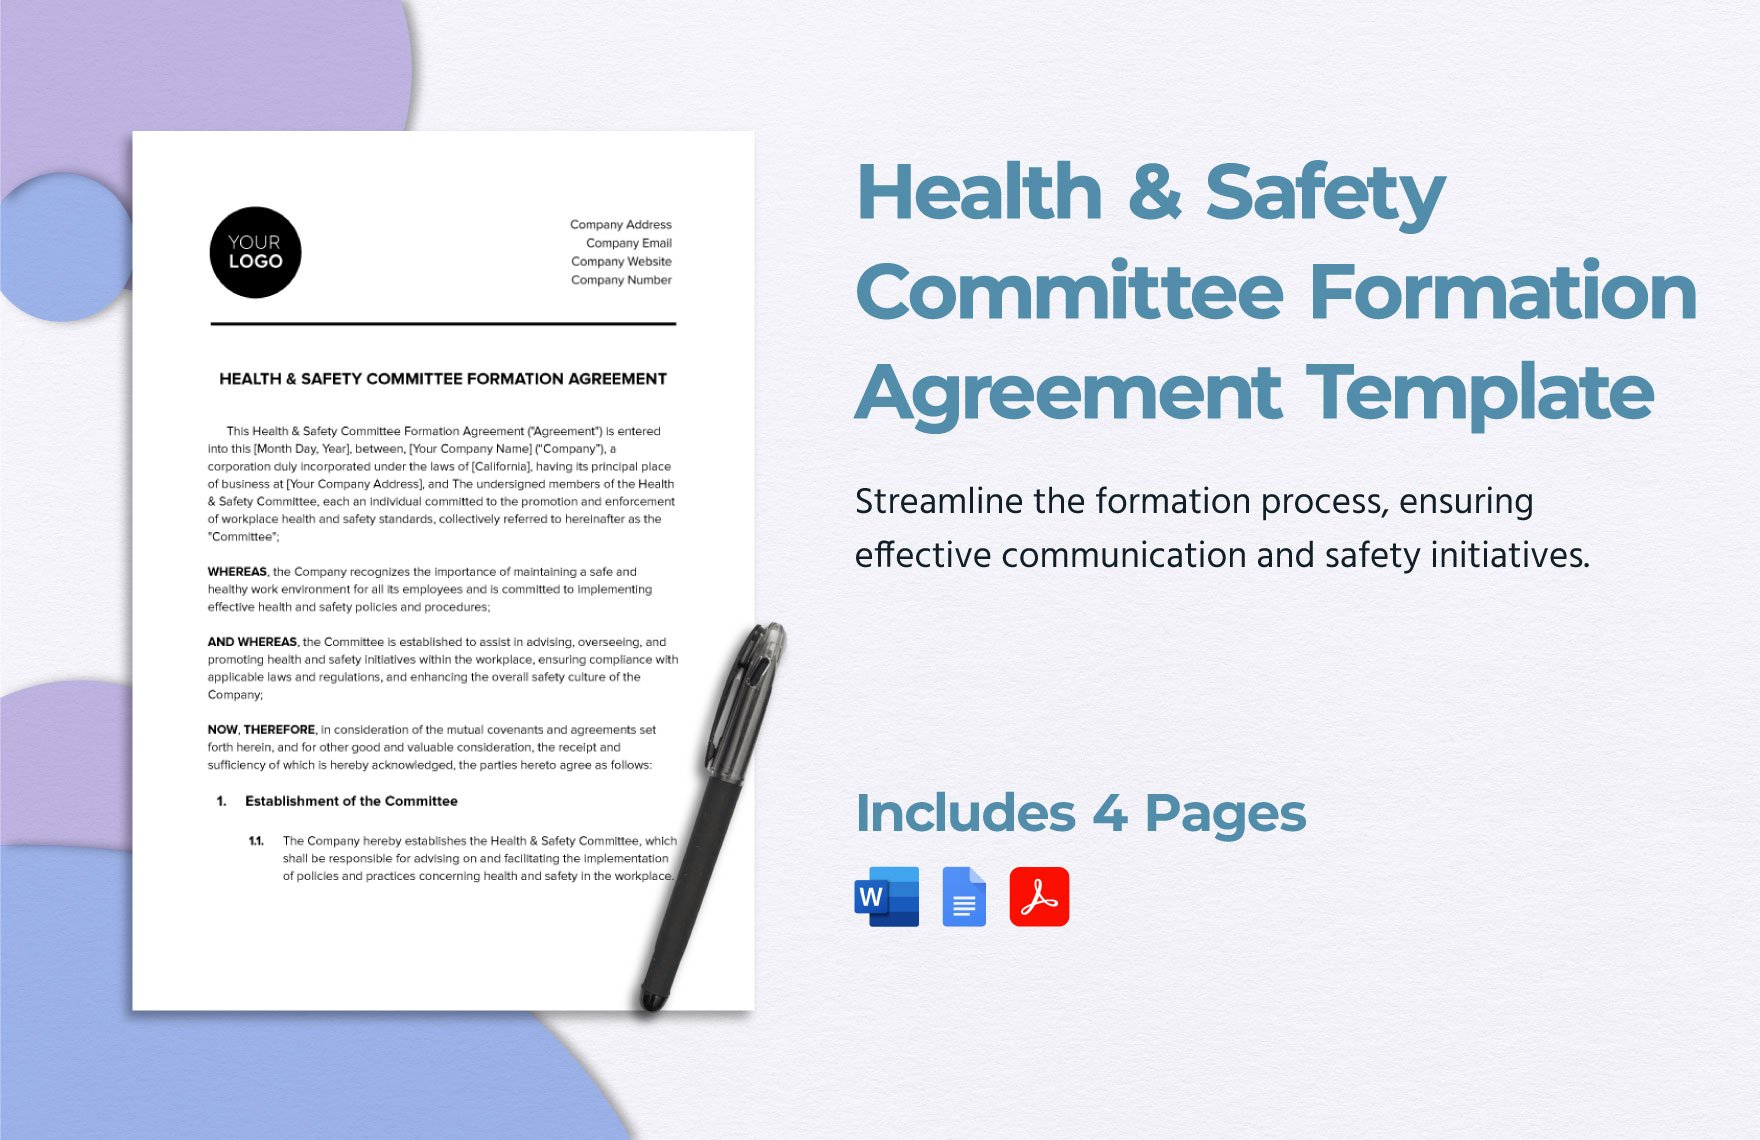 Health & Safety Committee Formation Agreement Template